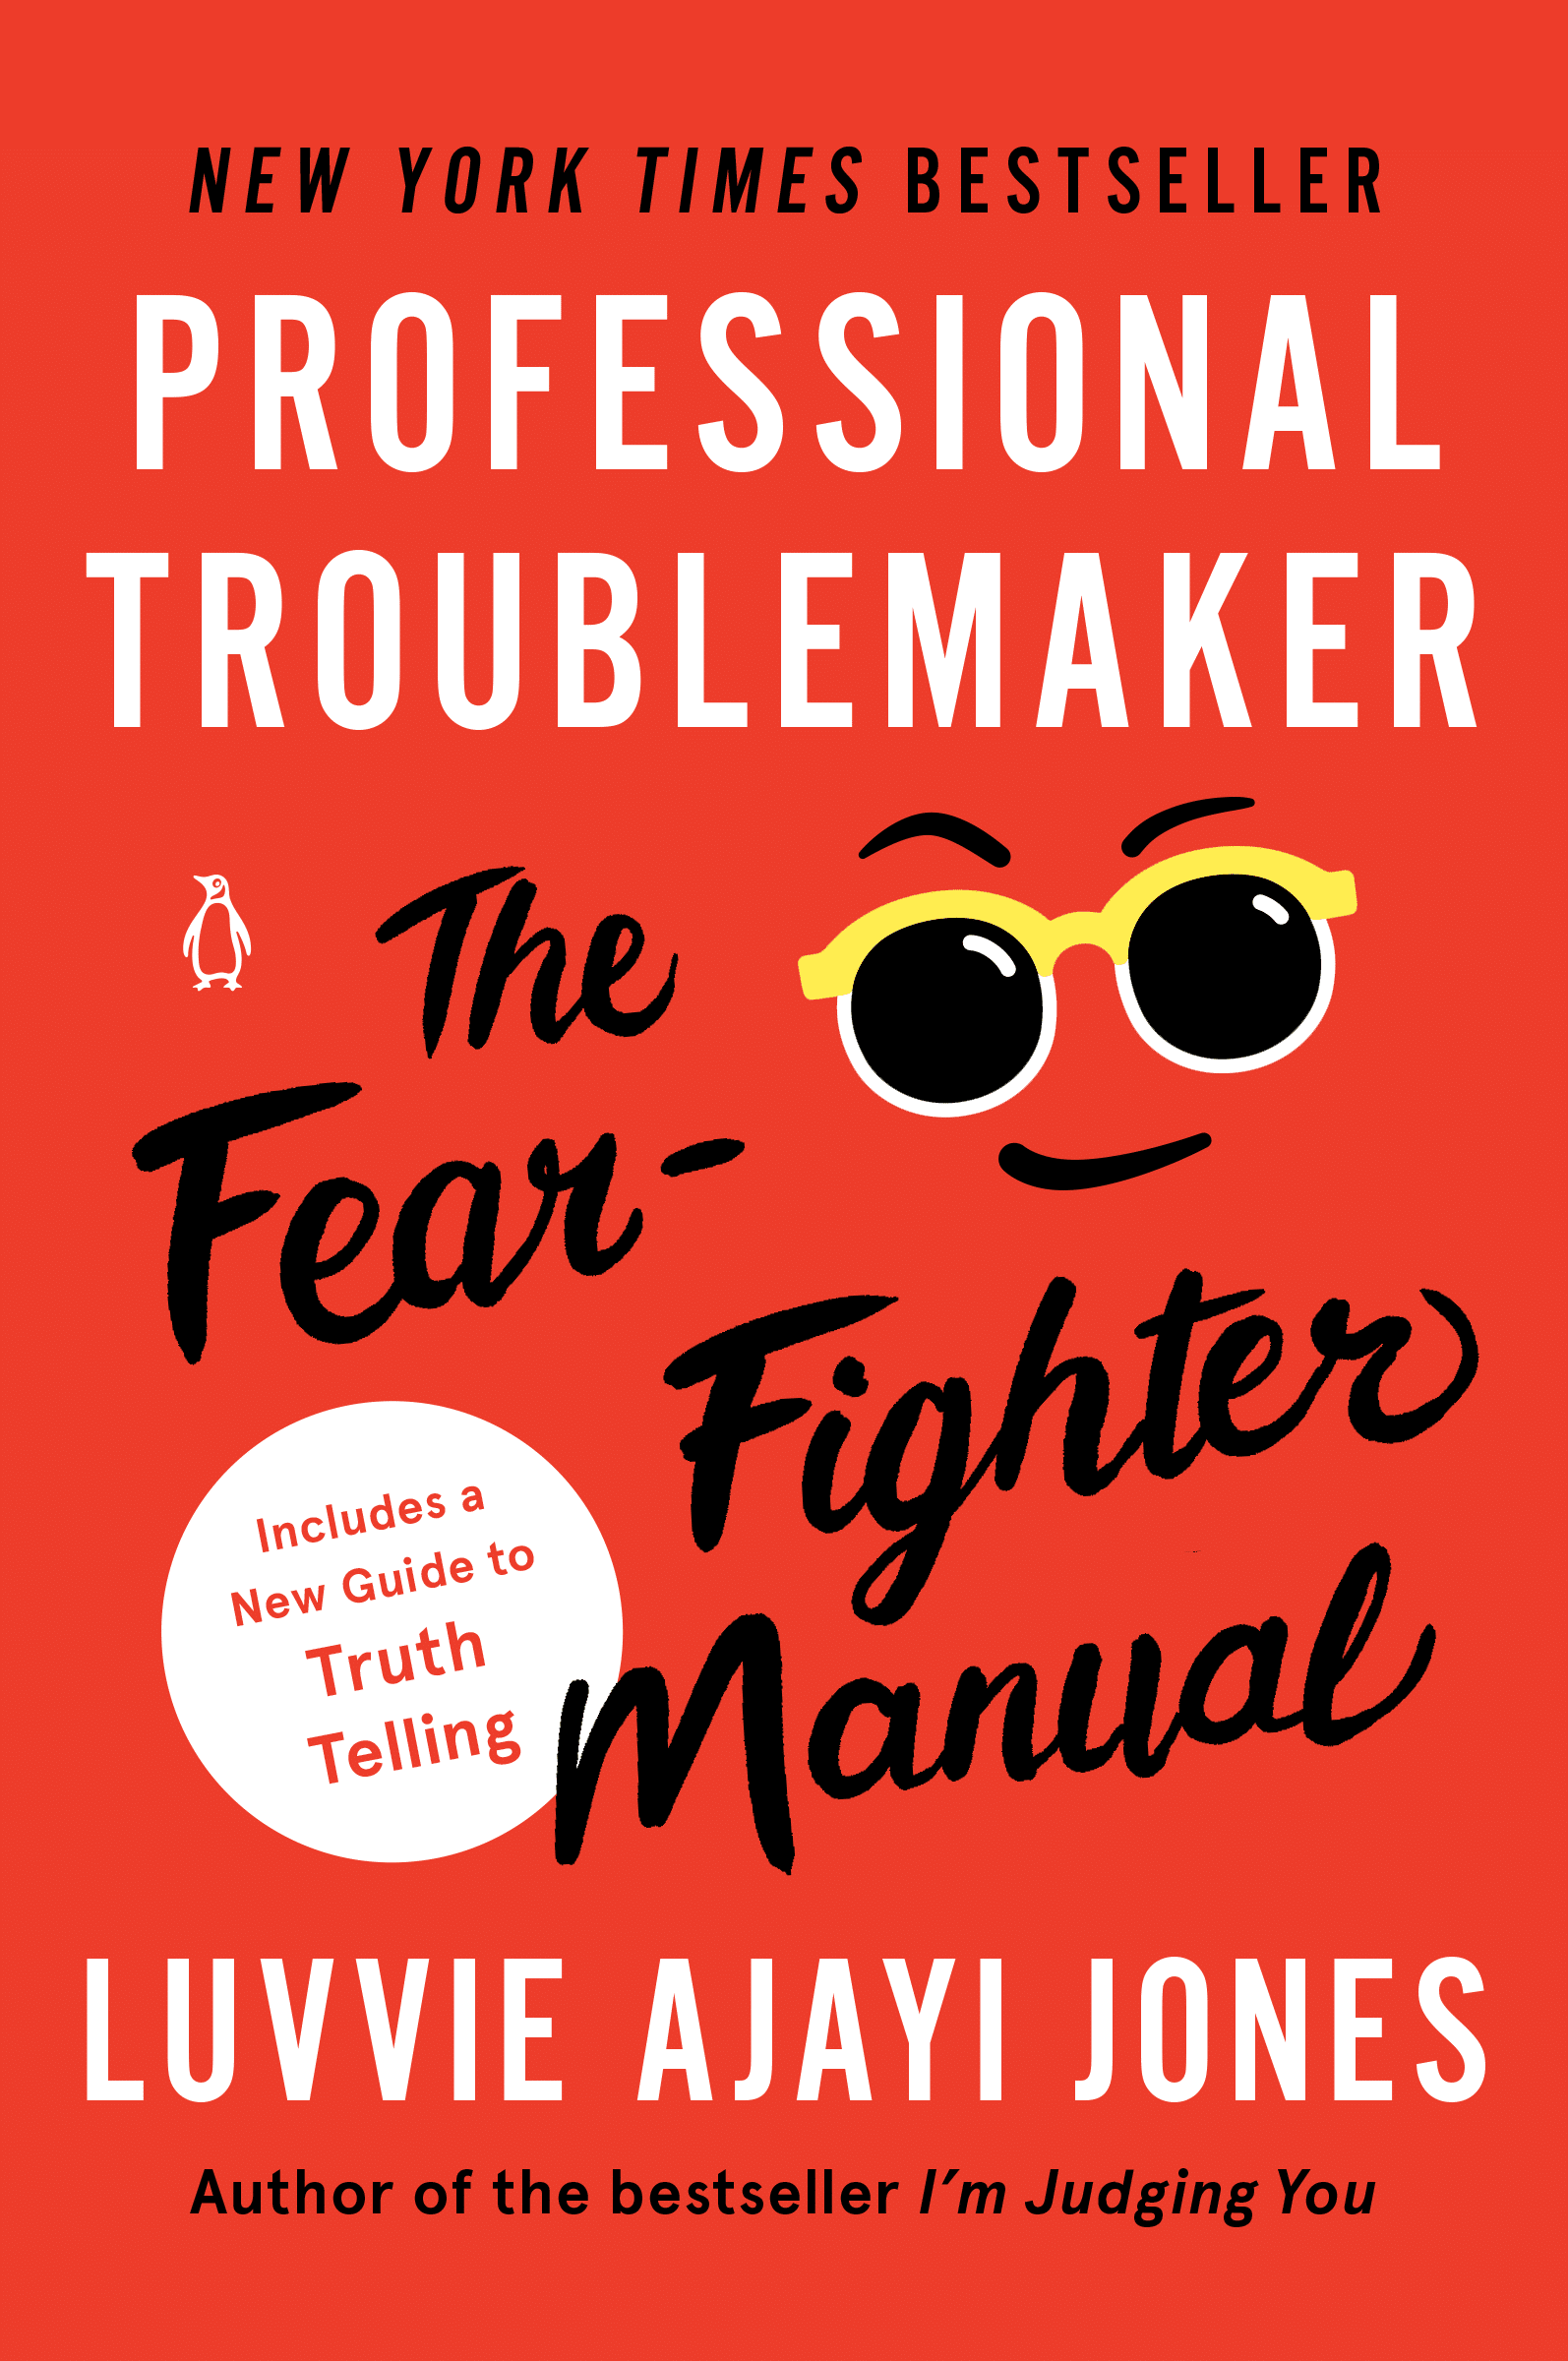 Professional-Troublemaker-Cover-White-Bottom-NYT-version